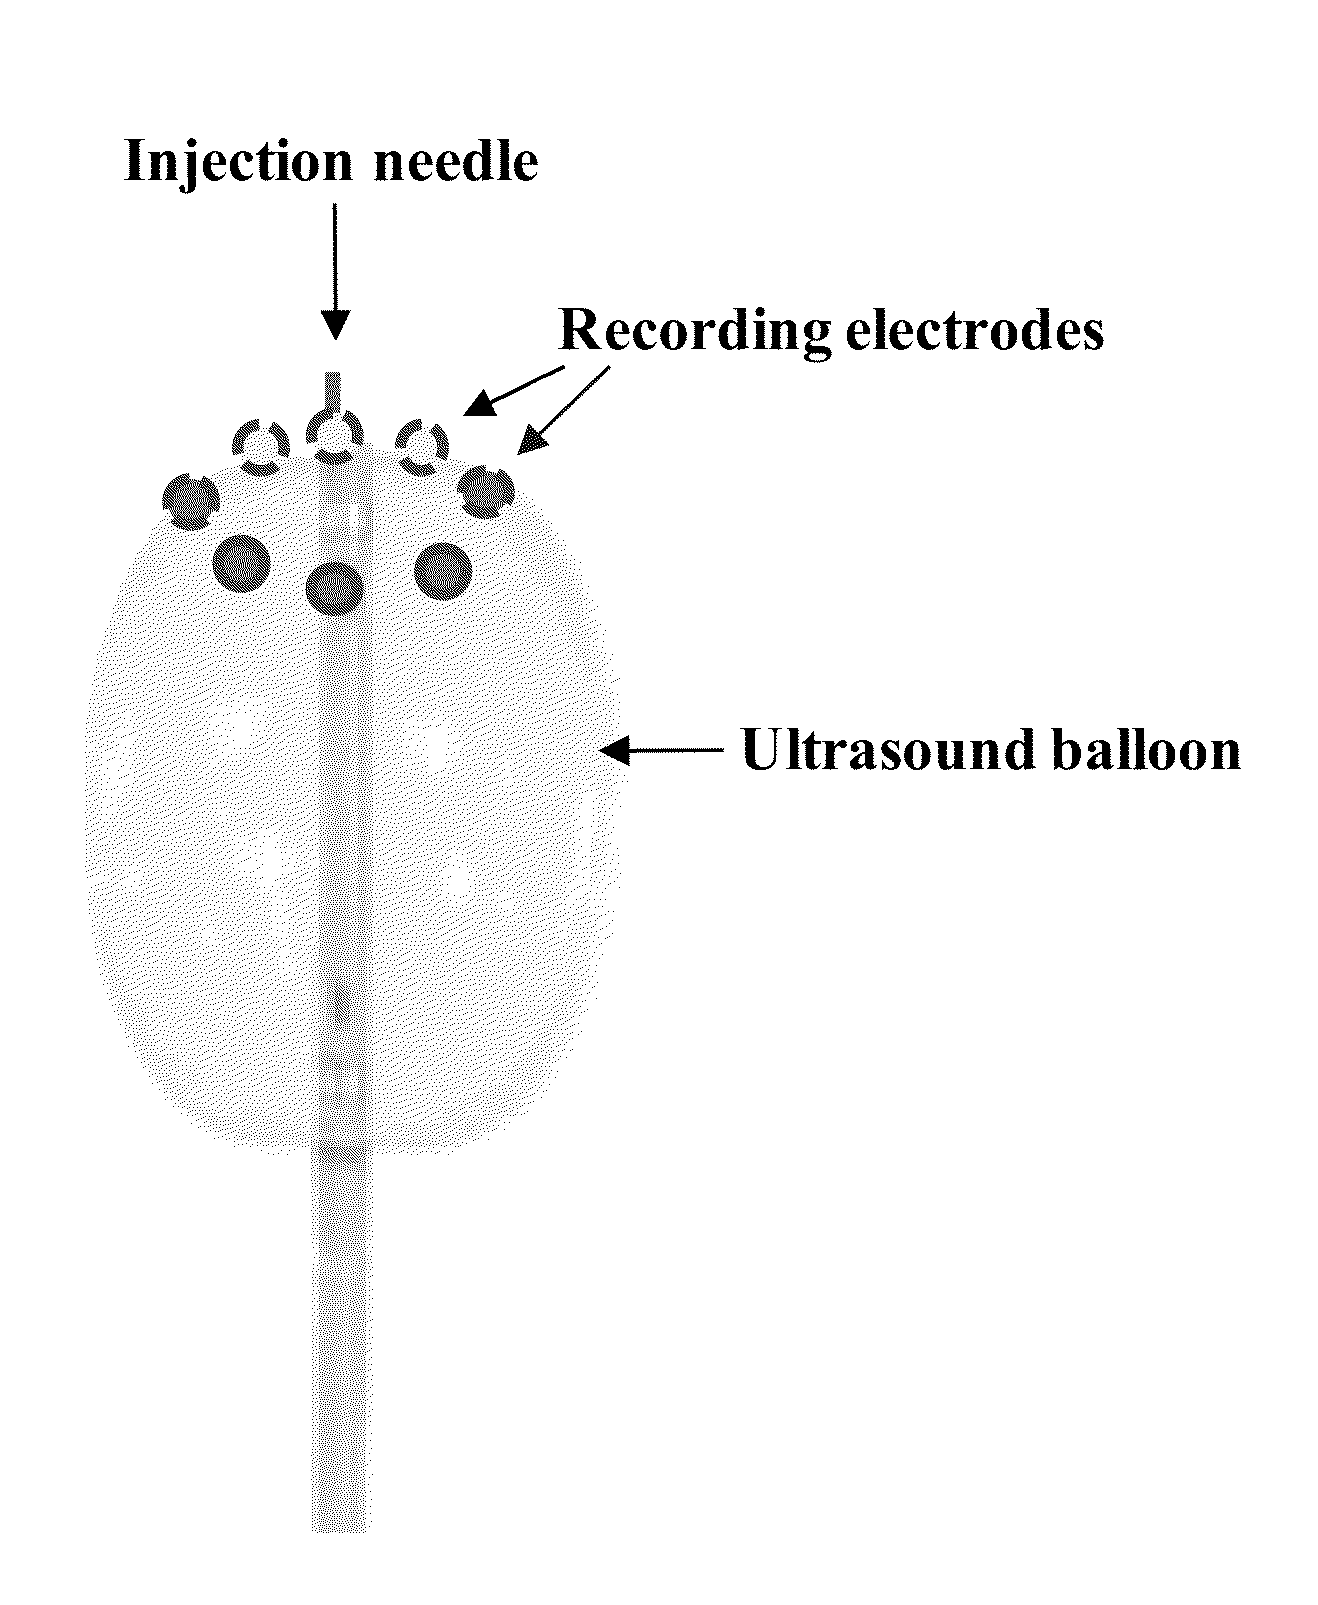 Devices for material delivery, electroporation, sonoporation, and/or monitoring electrophysiological activity